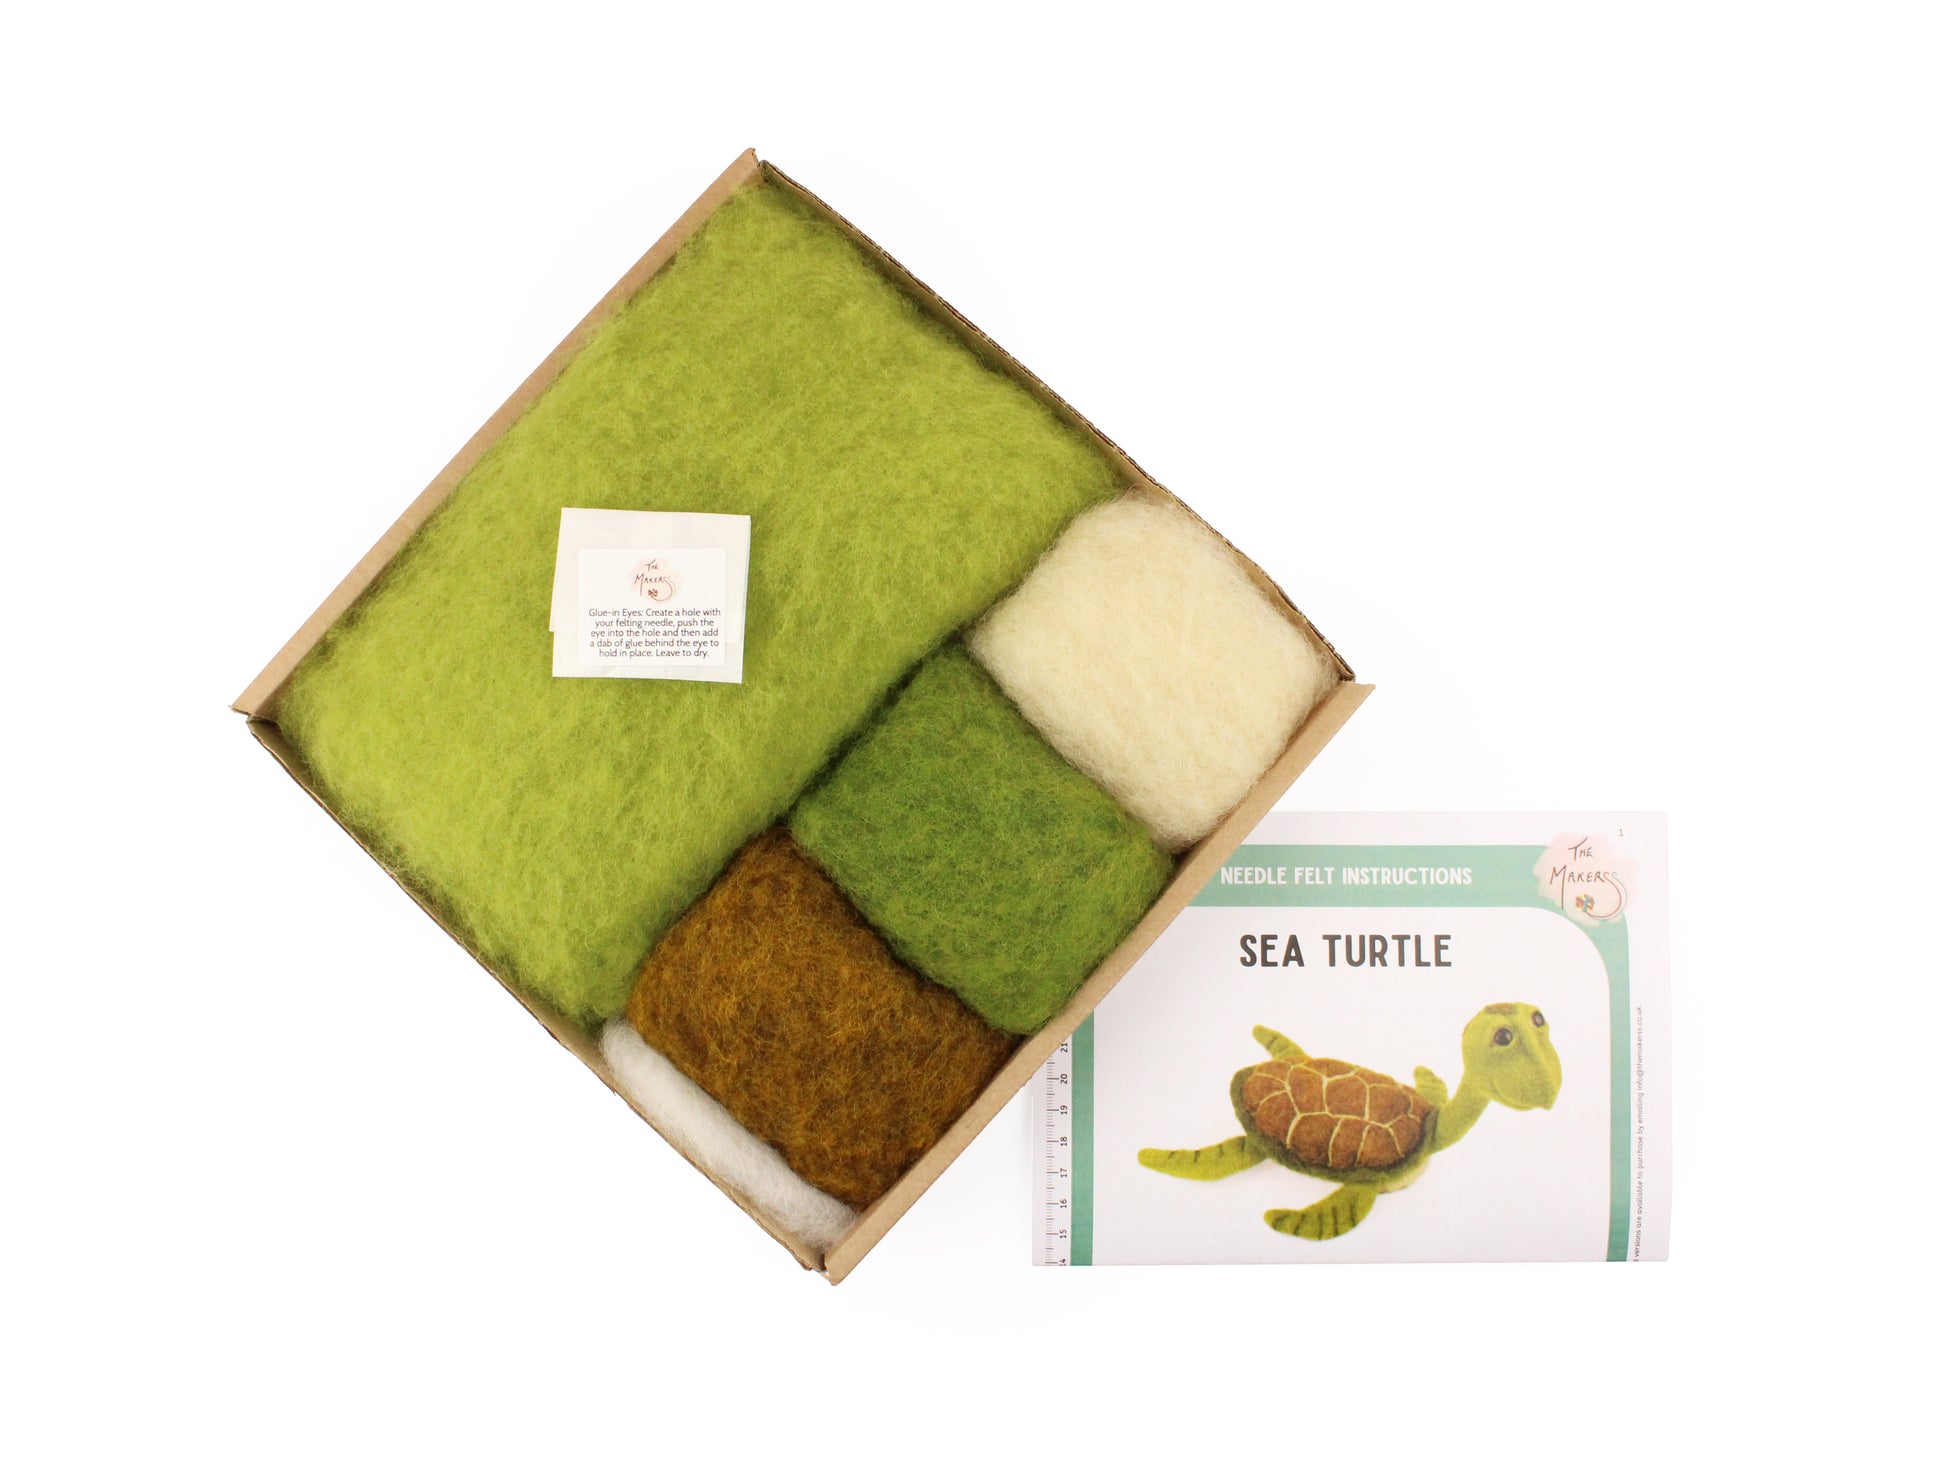 Sea Turtle Needle Felting Pack - with or without tools - The Makerss